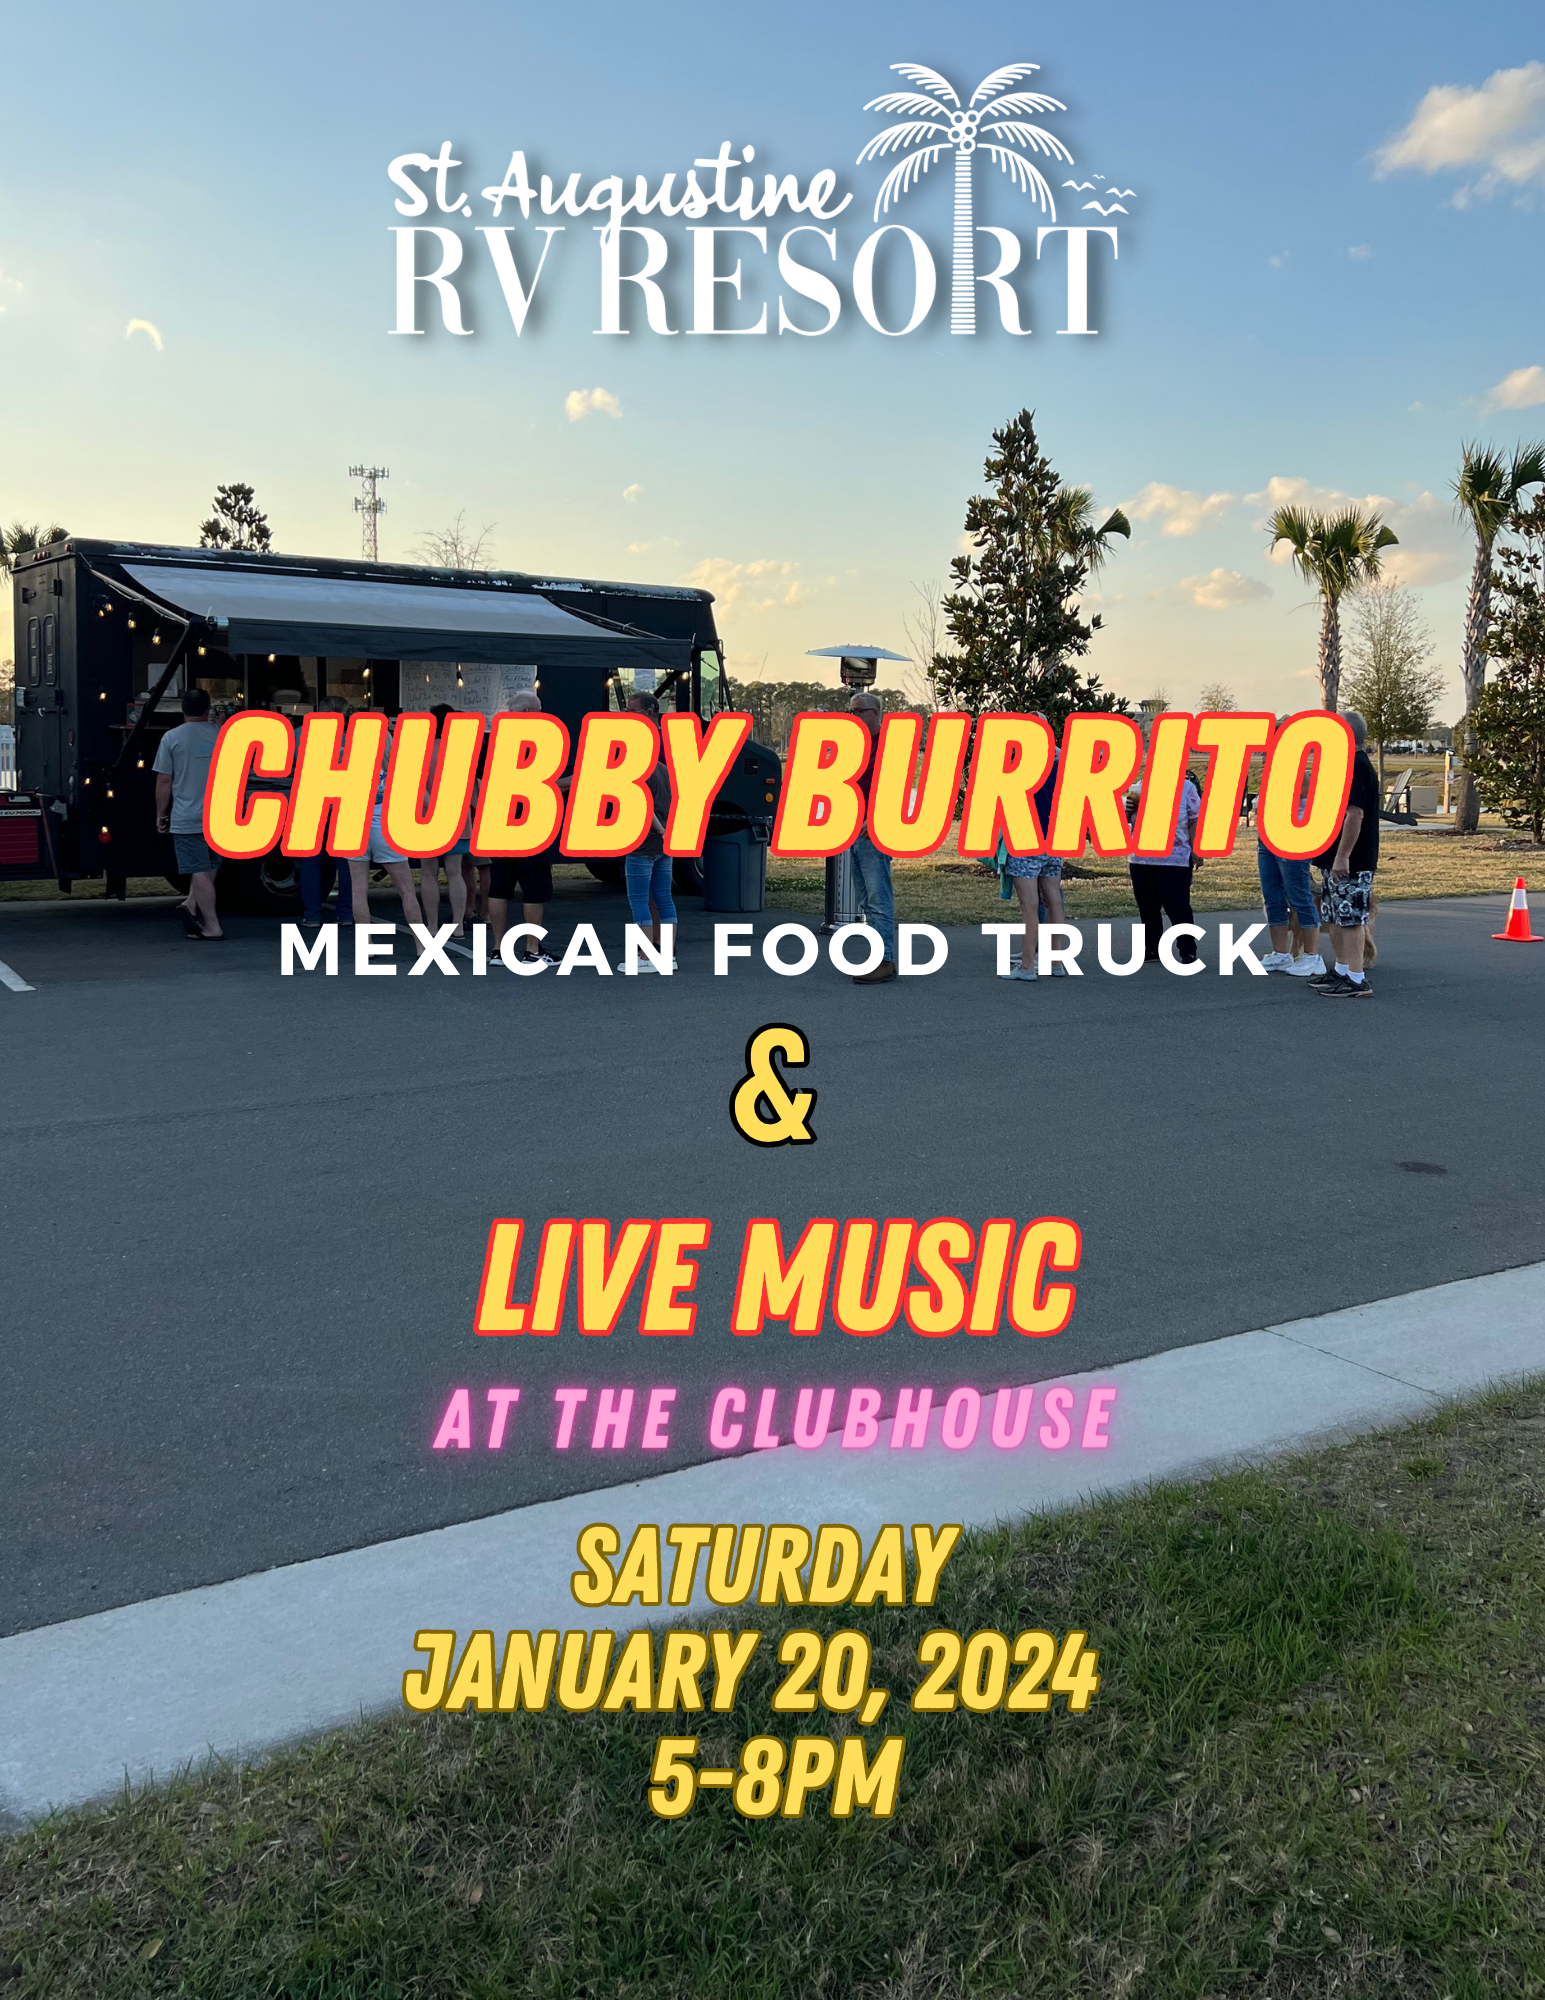 Mexican Food Truck & Live Music Sat 1/20/24